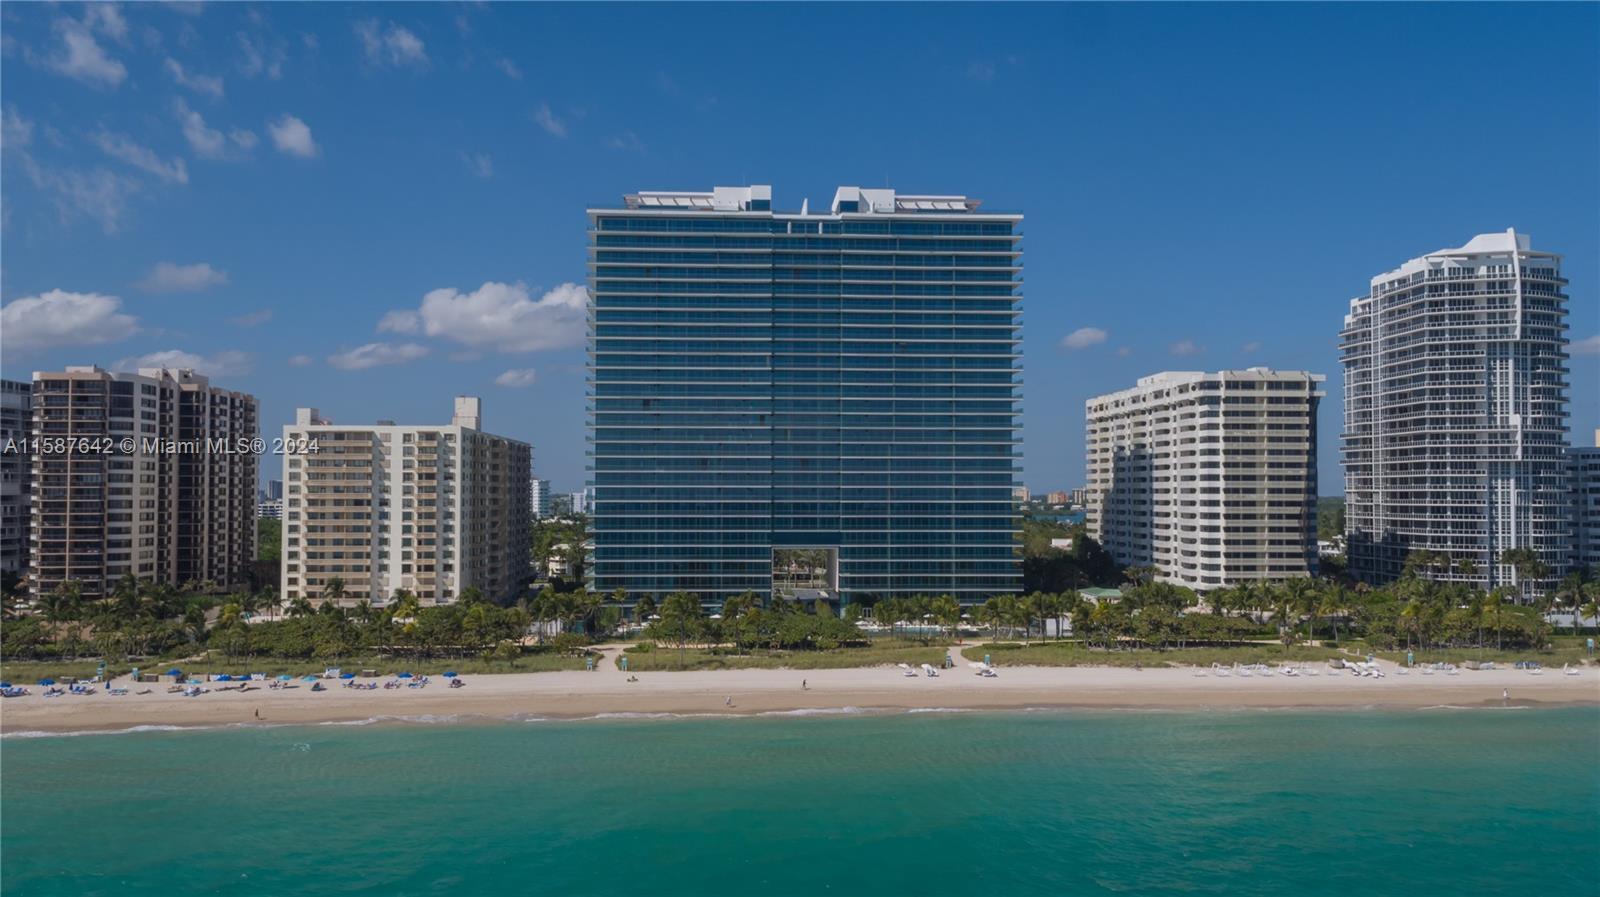 Stunning oceanfront condo (both living room AND master bedroom have direct oceanfront/palm tree views!) 1 bedroom + den (full bath, closet, Murphy bed that converts to a king or 2 twins) at the prestigious Oceana Bal Harbour. Fully furnished – just remodeled interior that includes BB Italia, Roche Bobois & Reflex Angelo furnishings, rugs from Italy, contemporary art collection, upgraded kitchen, interior doors, and roll-down shades that 'disappear', B&W sound system, & flush ceiling lighting. The kitchen features Gaggenau appliances, a coffee maker, a steam oven, a warming drawer, a wine cooler, and an induction stove. This is better than being on vacation, a MUST SEE! Oceana is one of the most beautiful buildings in the Miami area